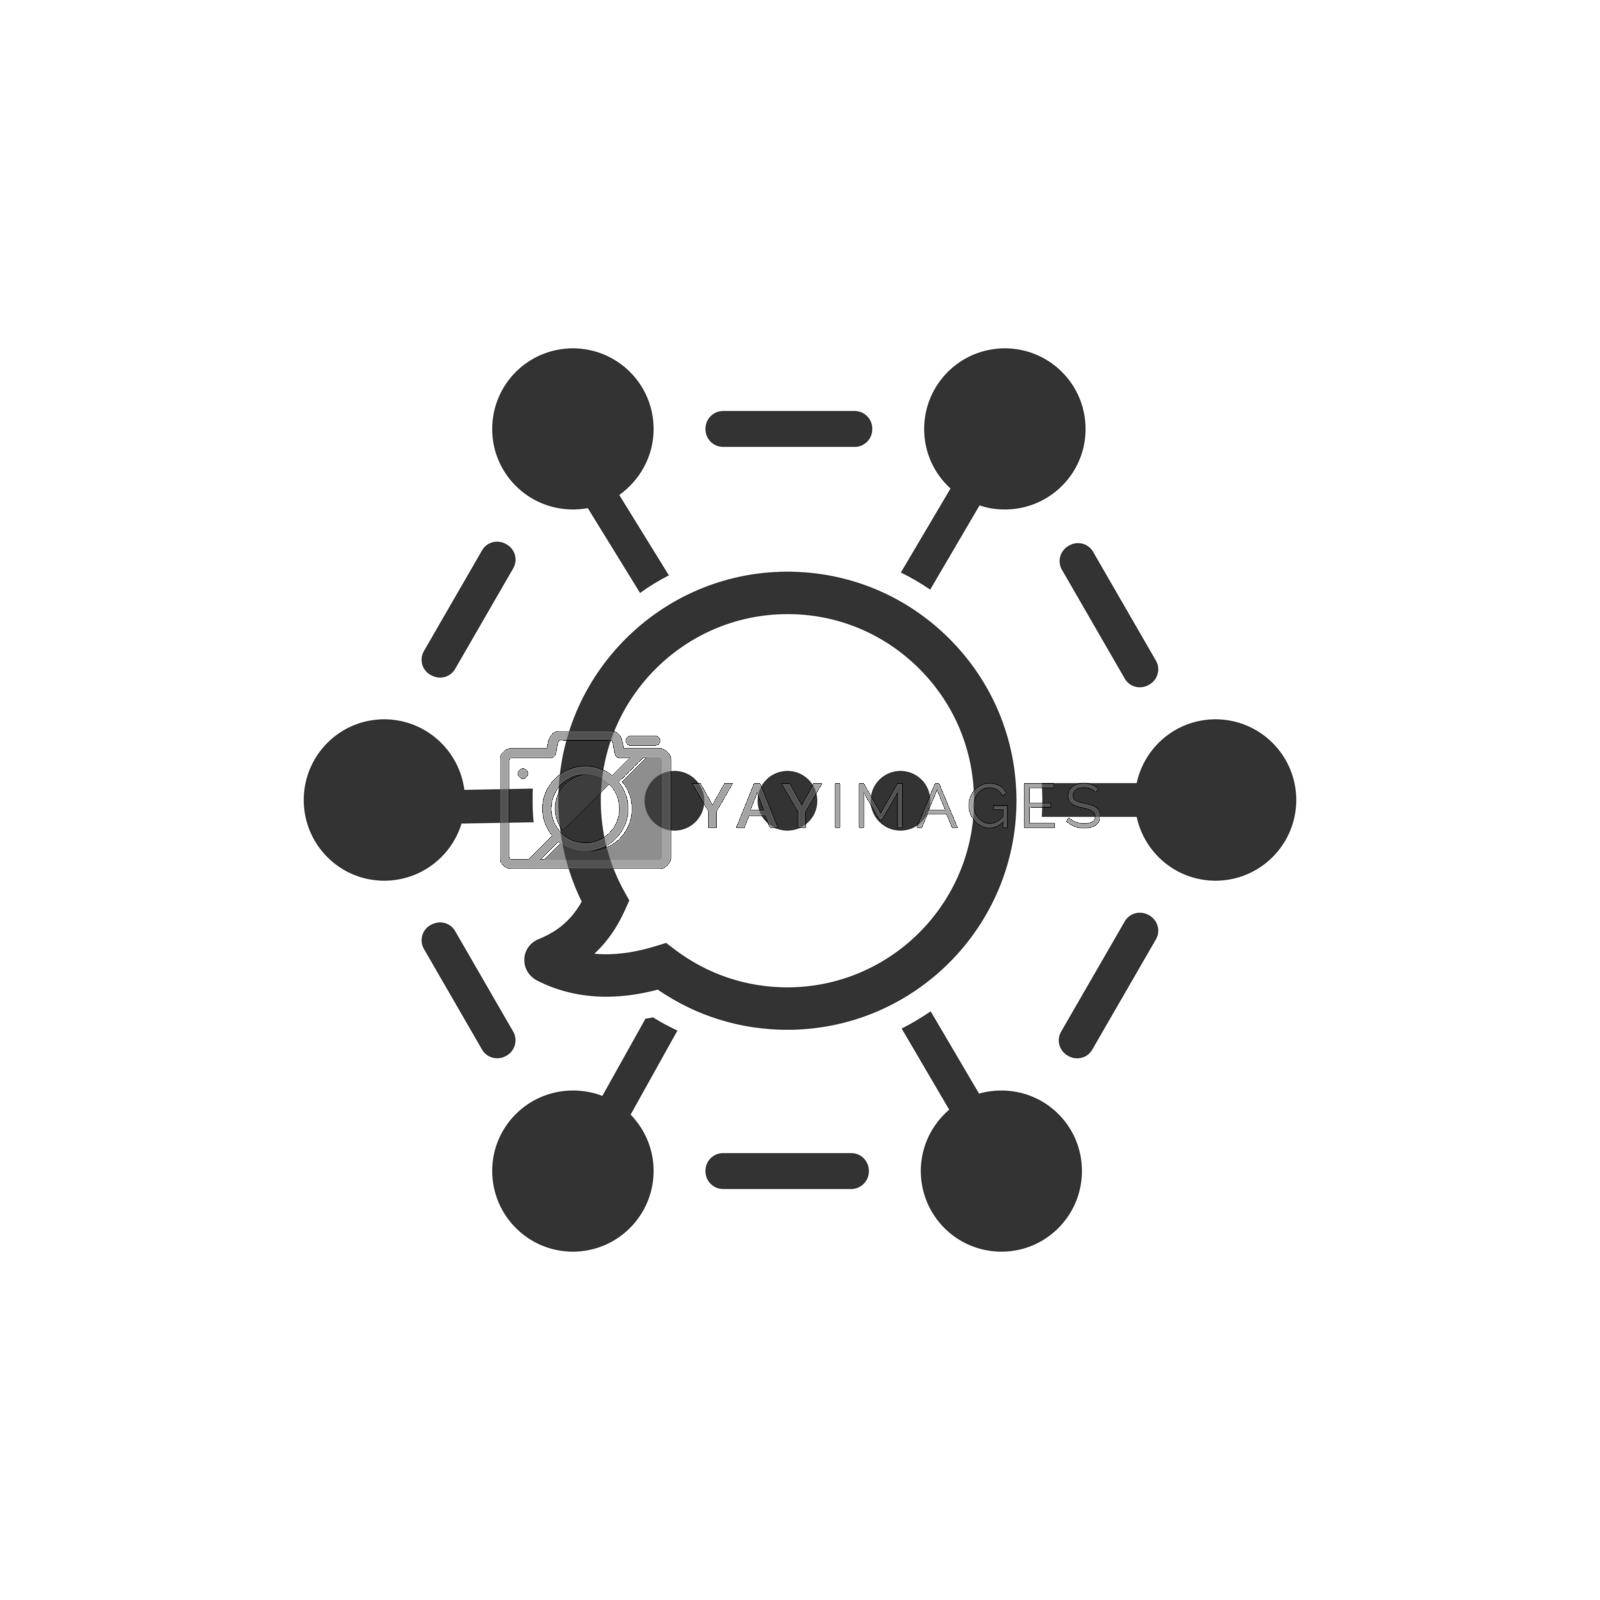 Communication network icon. Vector EPS file. 